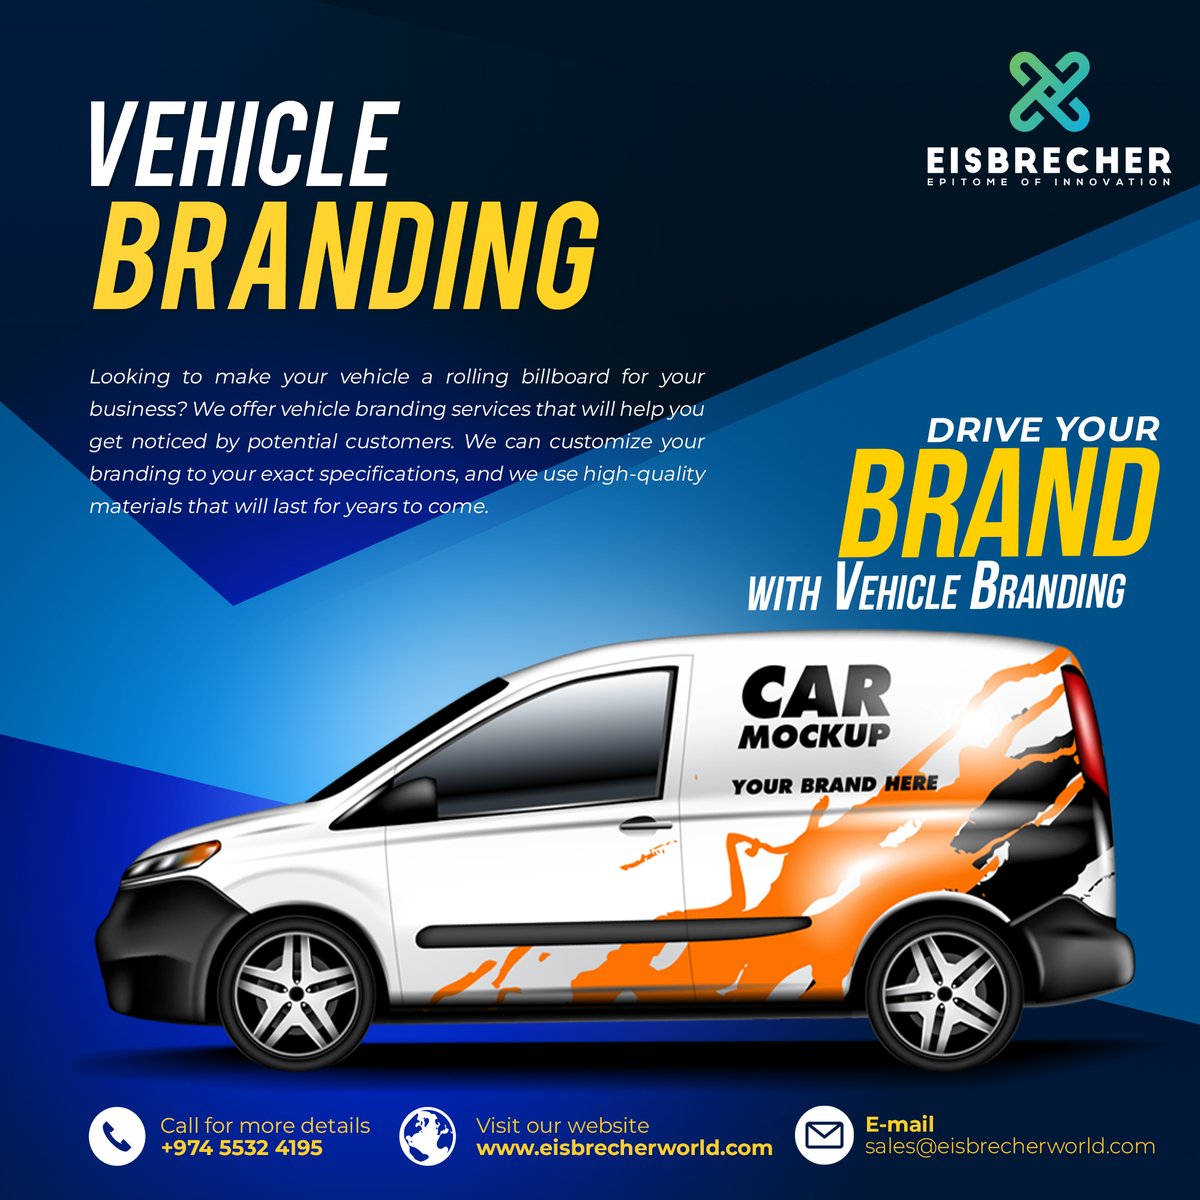 Vehicle Branding is one of the most unique & cost-effective ways to advertise & promote your brand. Contact us today to take your marketing to the next level.

Call: +974 44682997 / +974 30753334
Mail: sales@eisbrecherworld.com

#vehiclebranding #branding #marketingonwheels